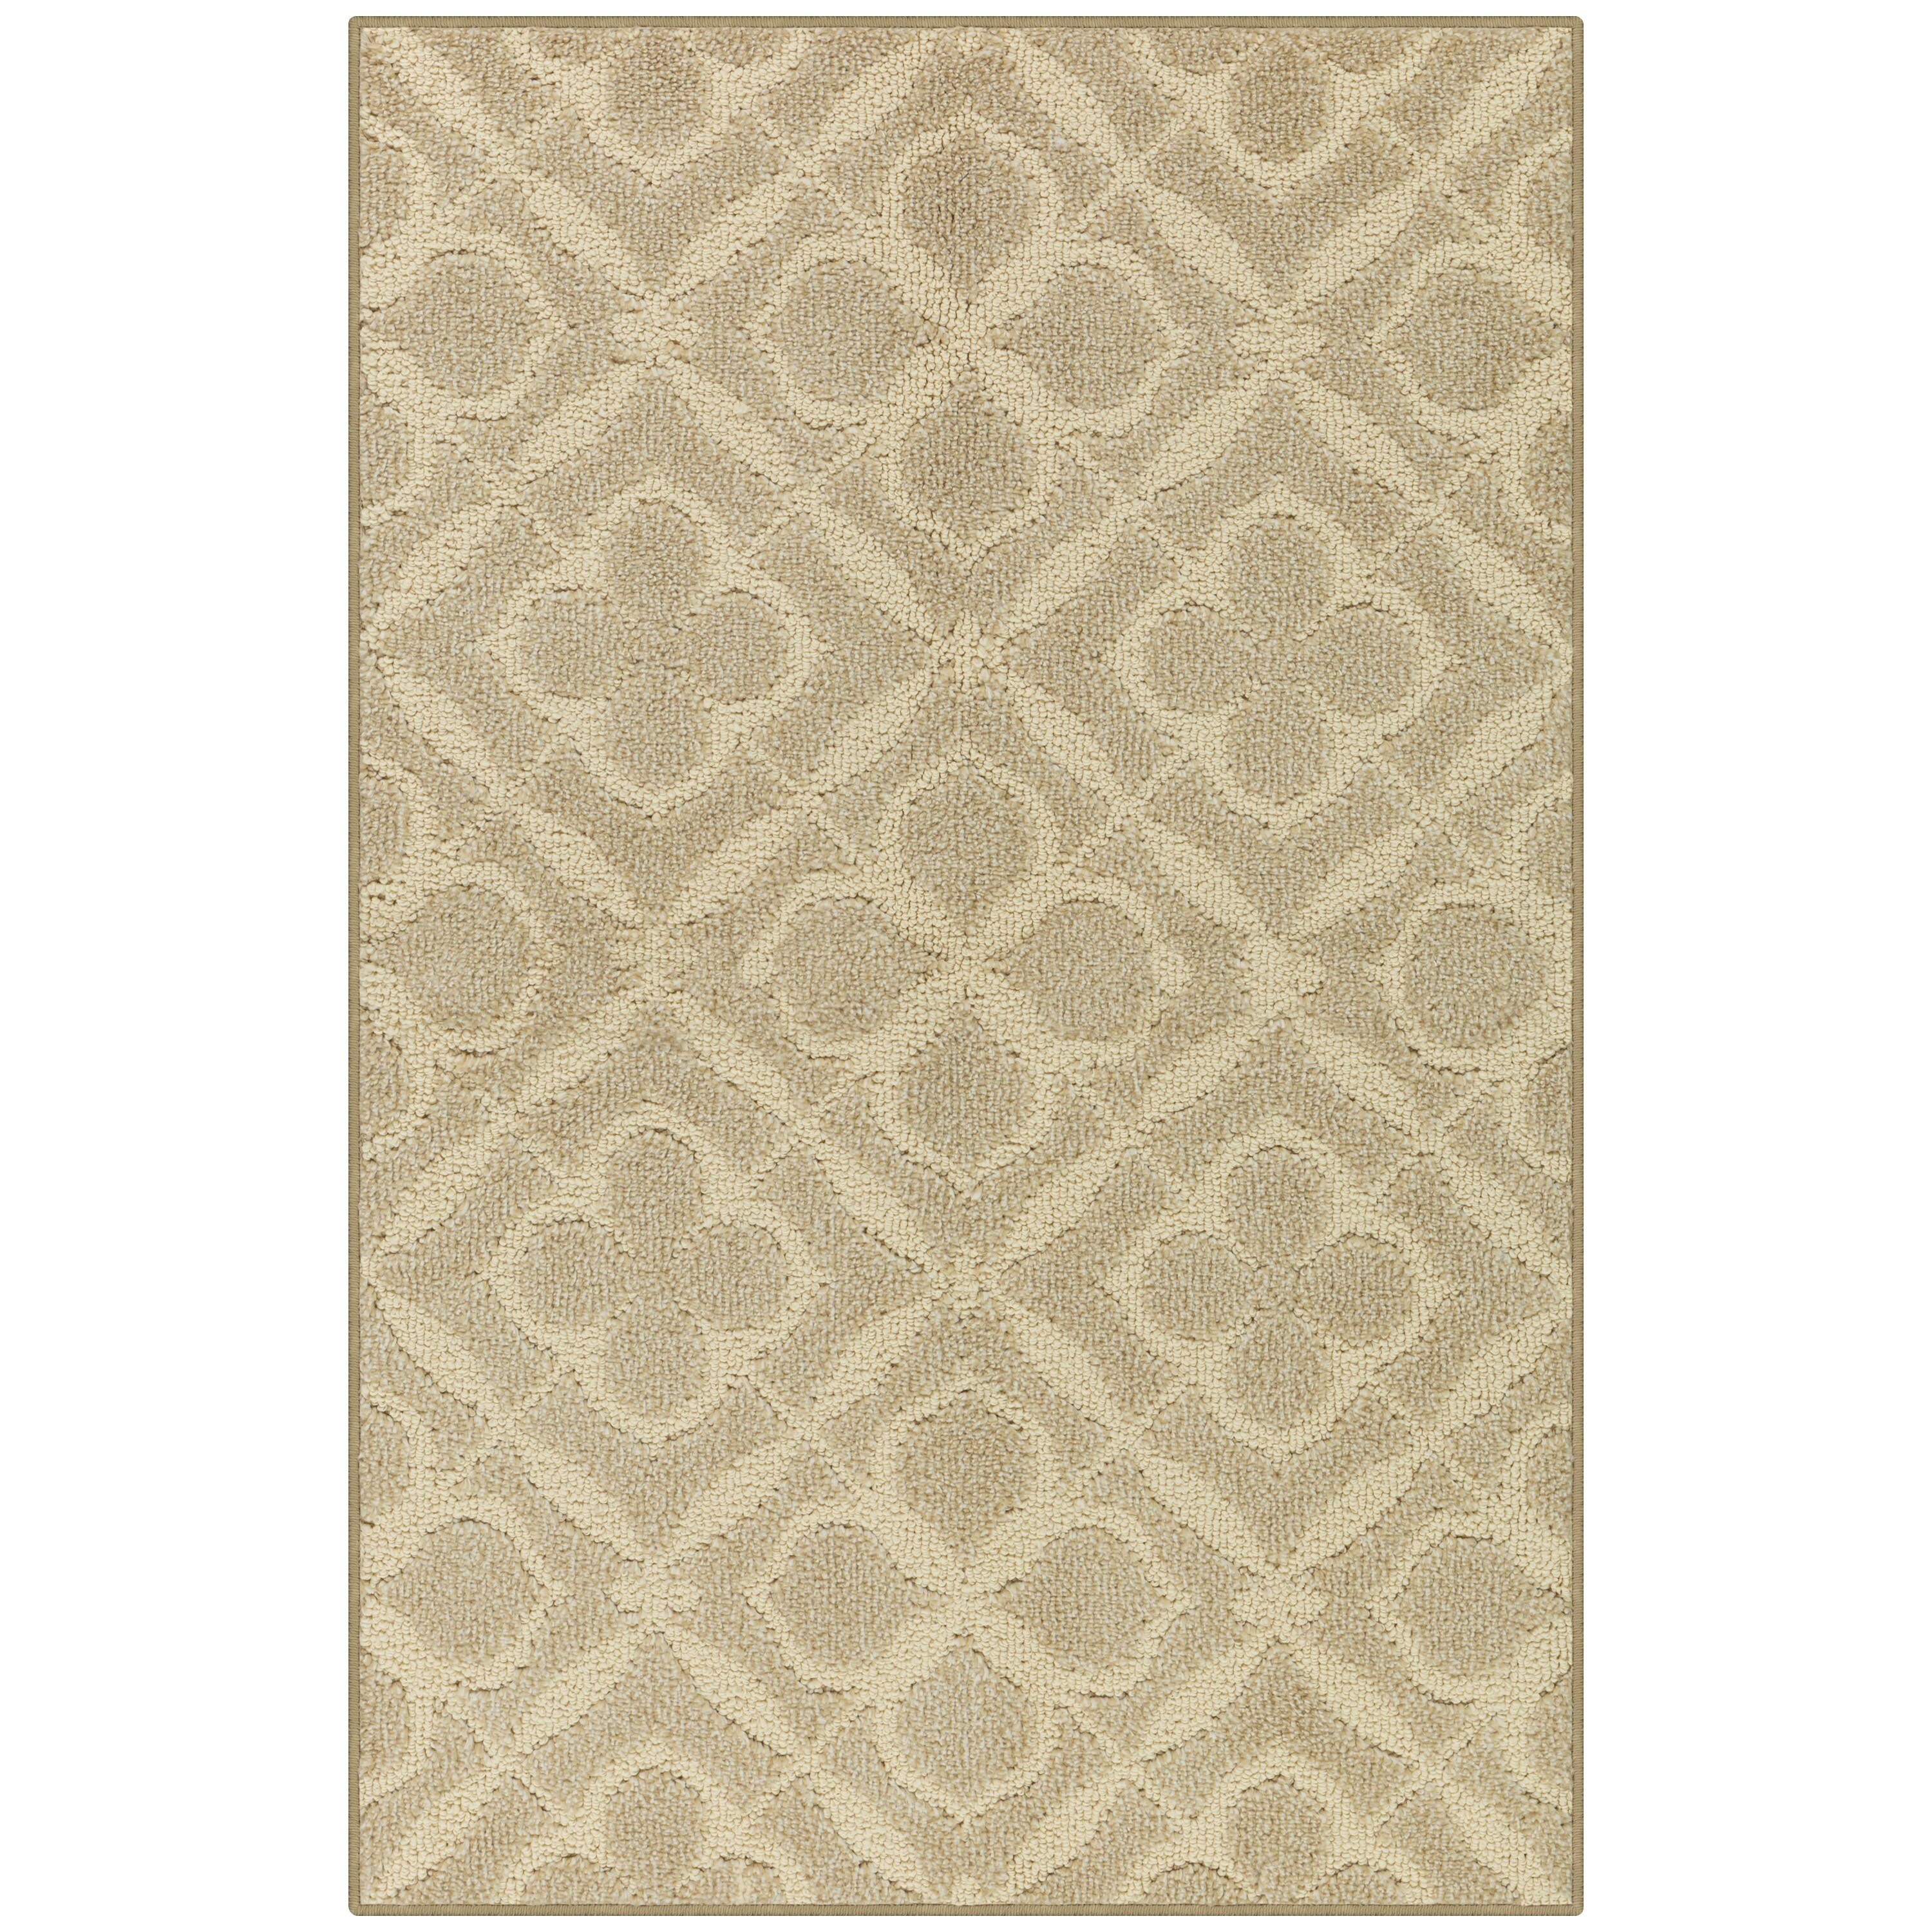 Allen Roth 3 X 4 Ft Chatham Tan Indoor Machine Washable Throw Rug At Lowes Com